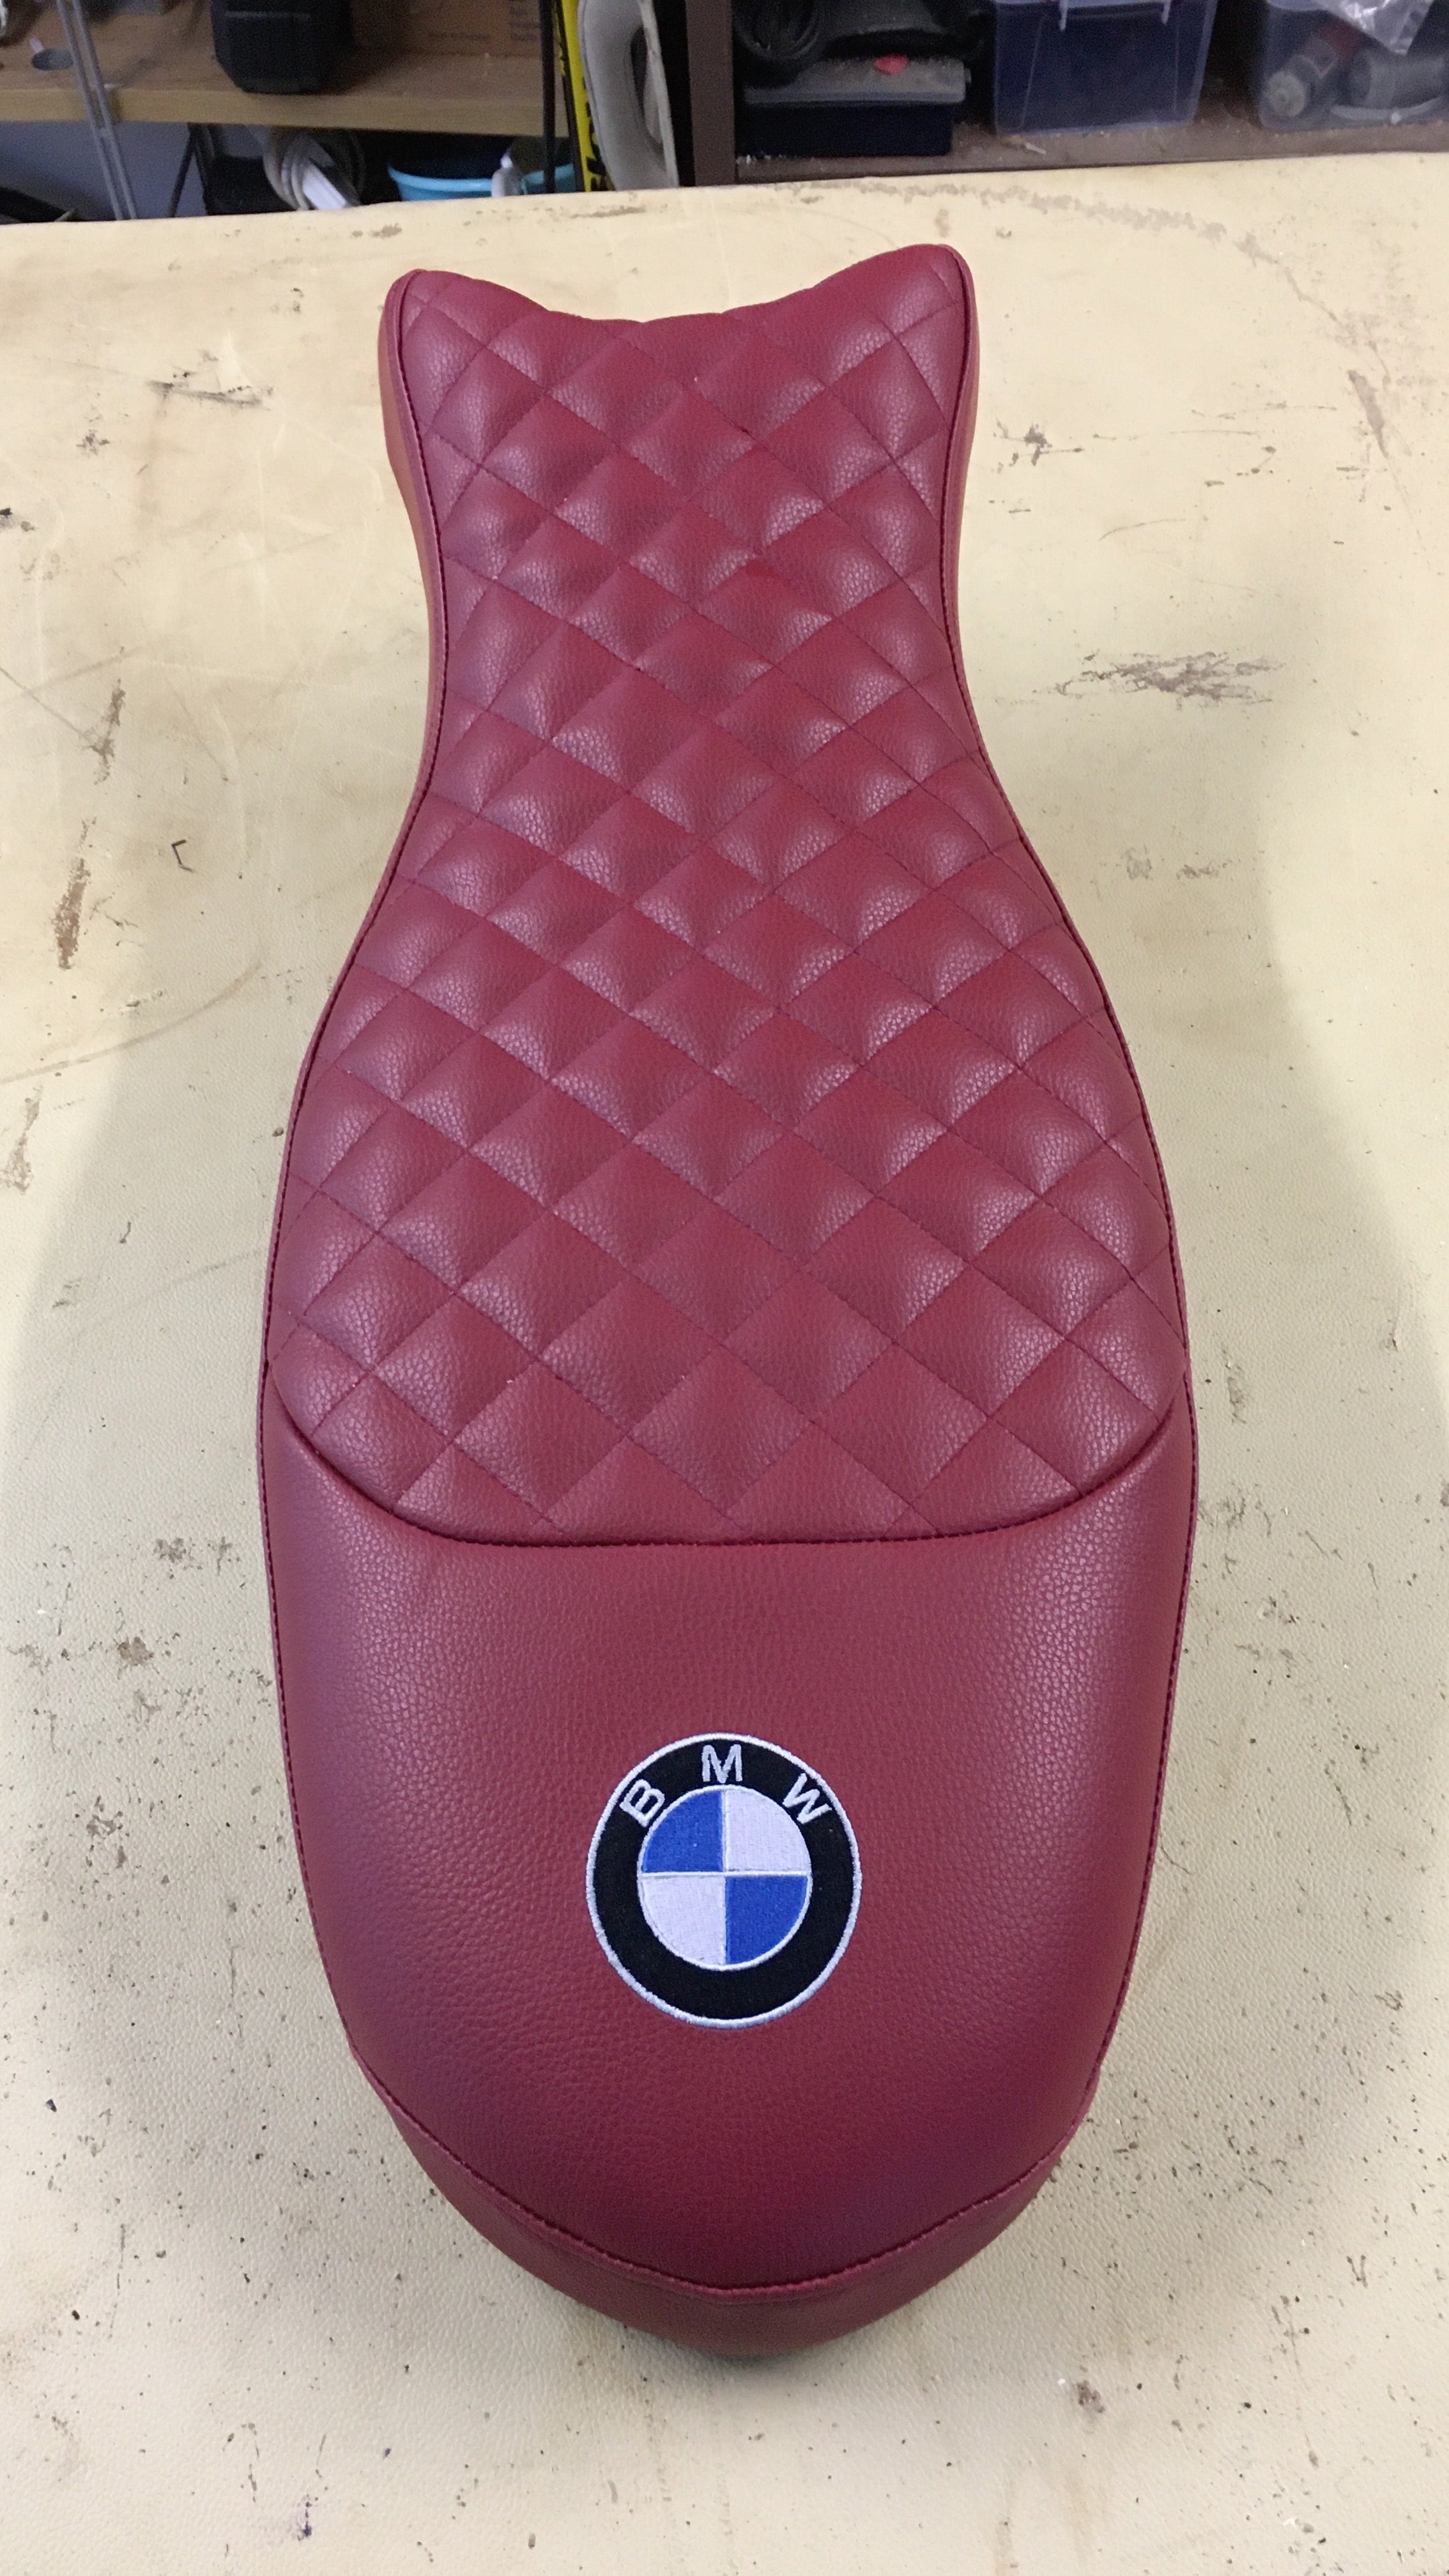 Sargent Seat For Rninet Page 5 Bmw